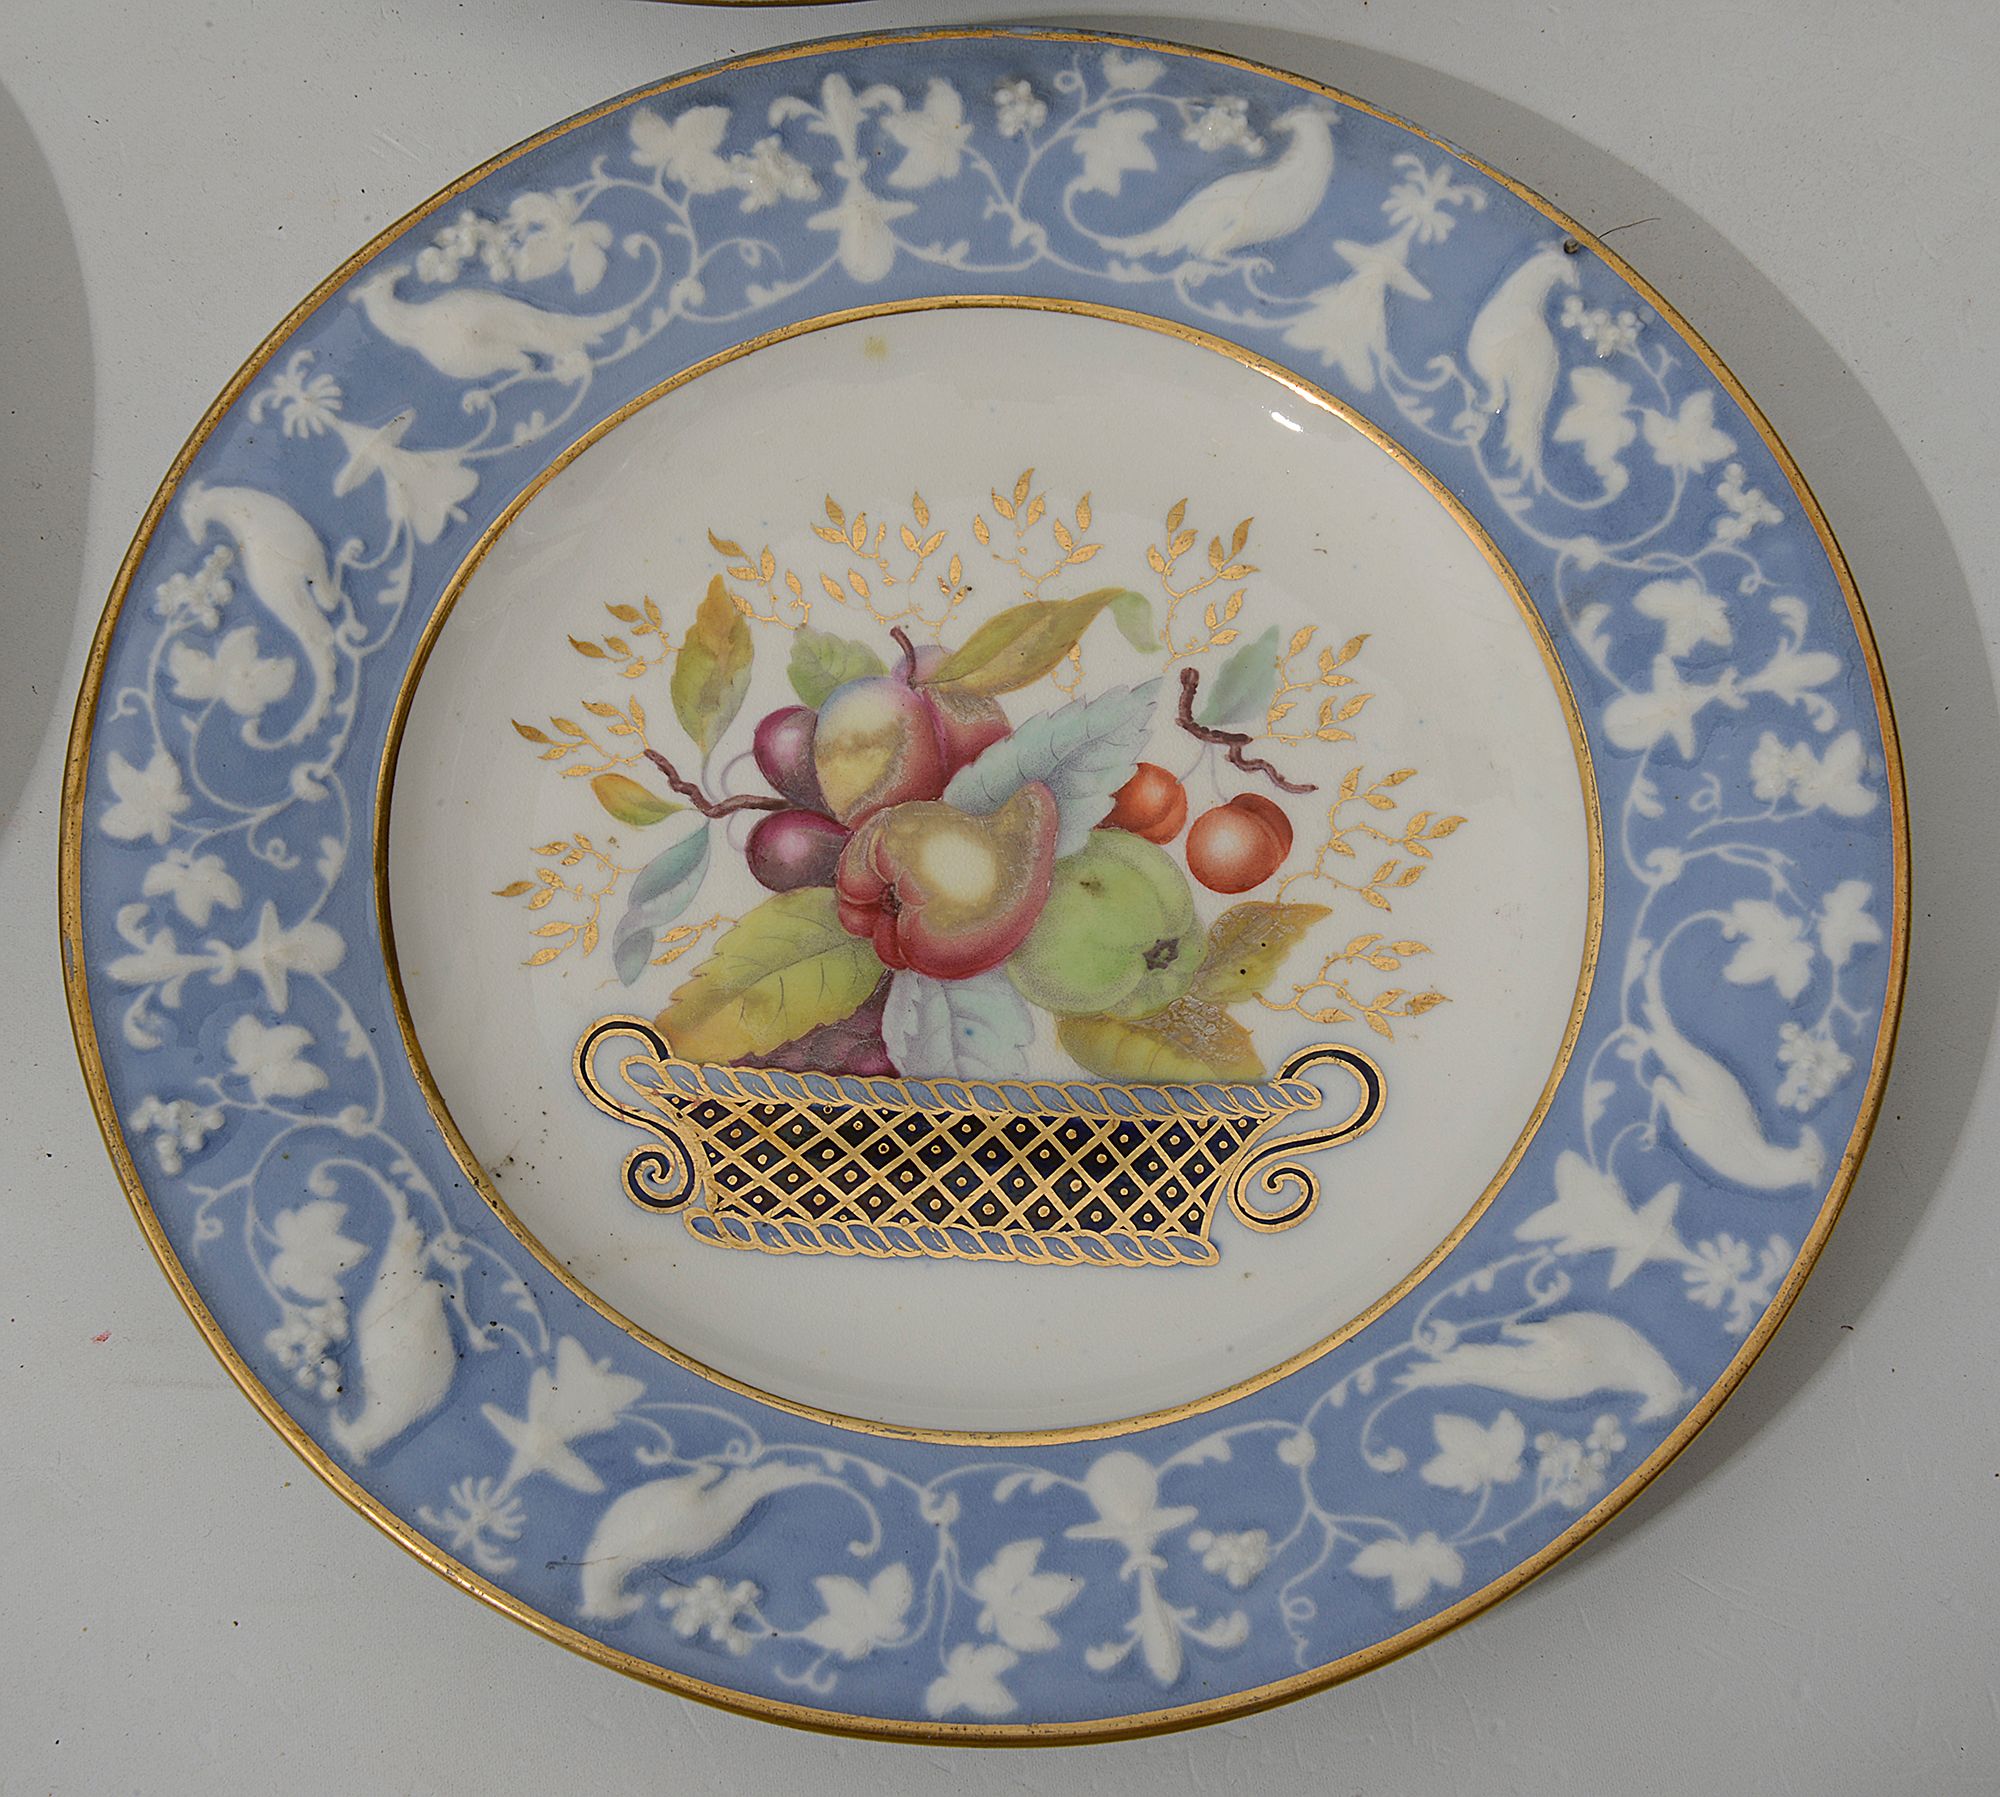 An early 19th century New Hall bone china part dessert service c.1815-20 - Image 3 of 4